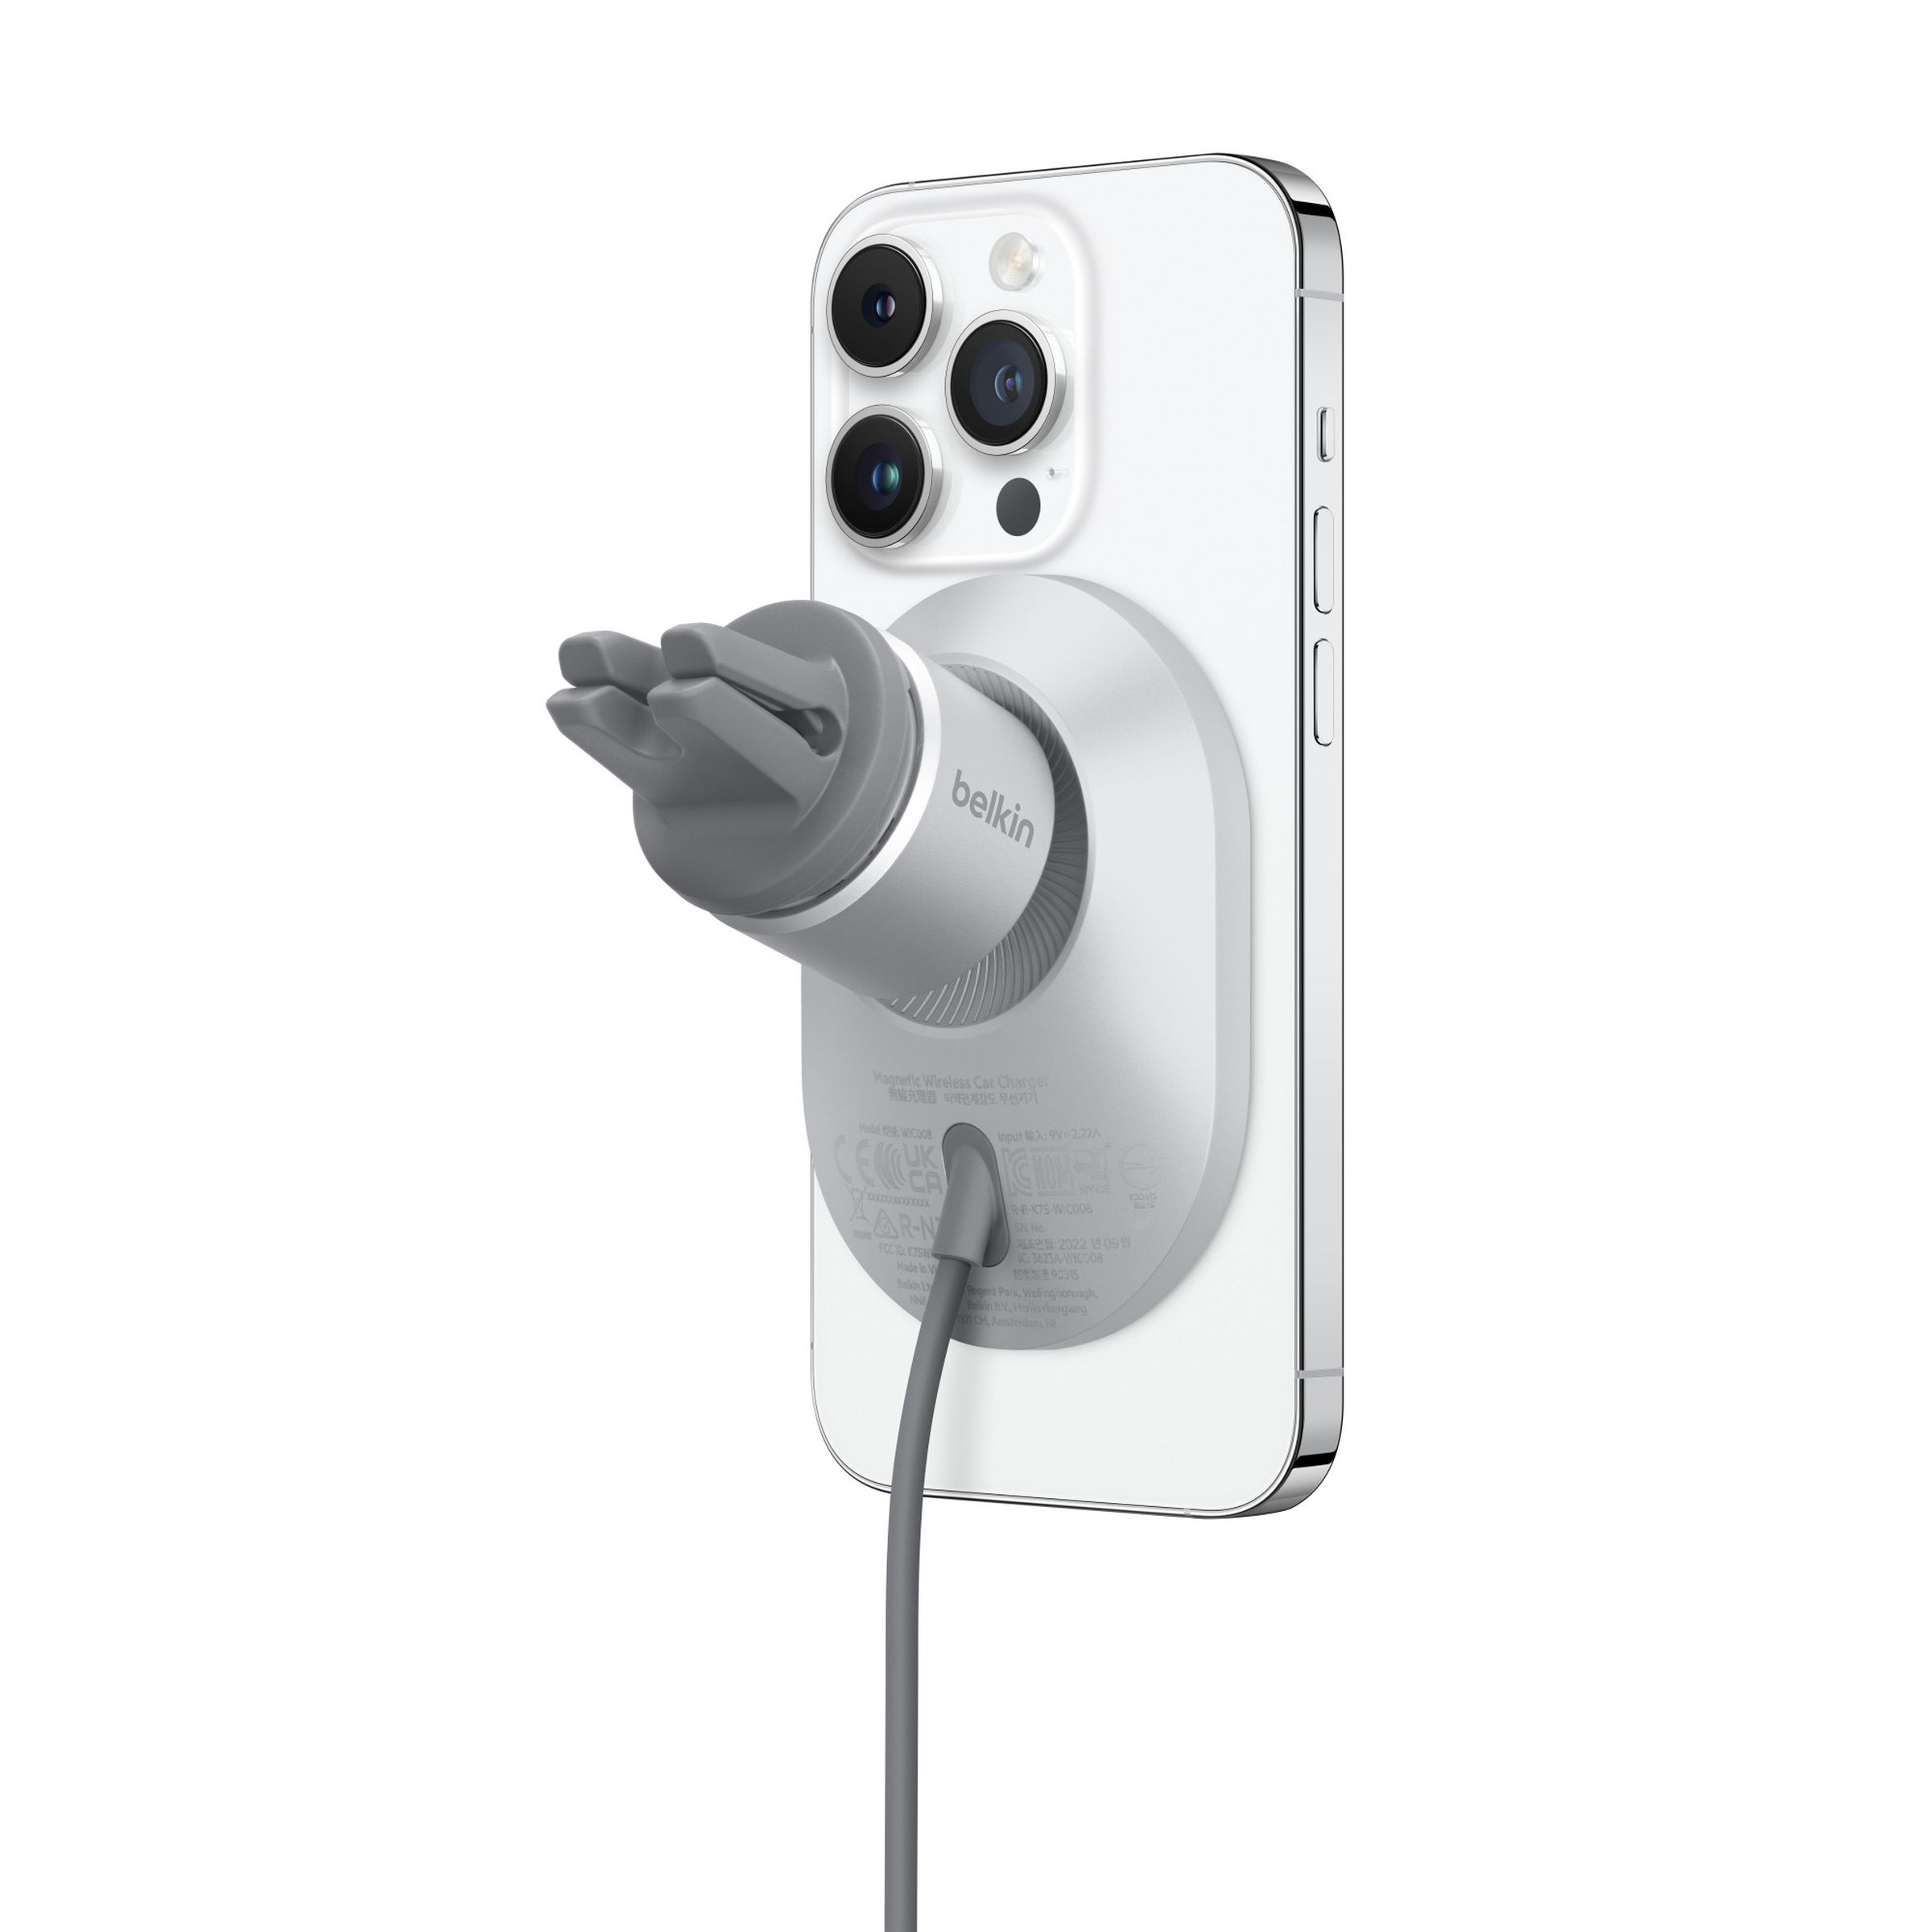 Image of an iPhone mounted to the Belkin charger.